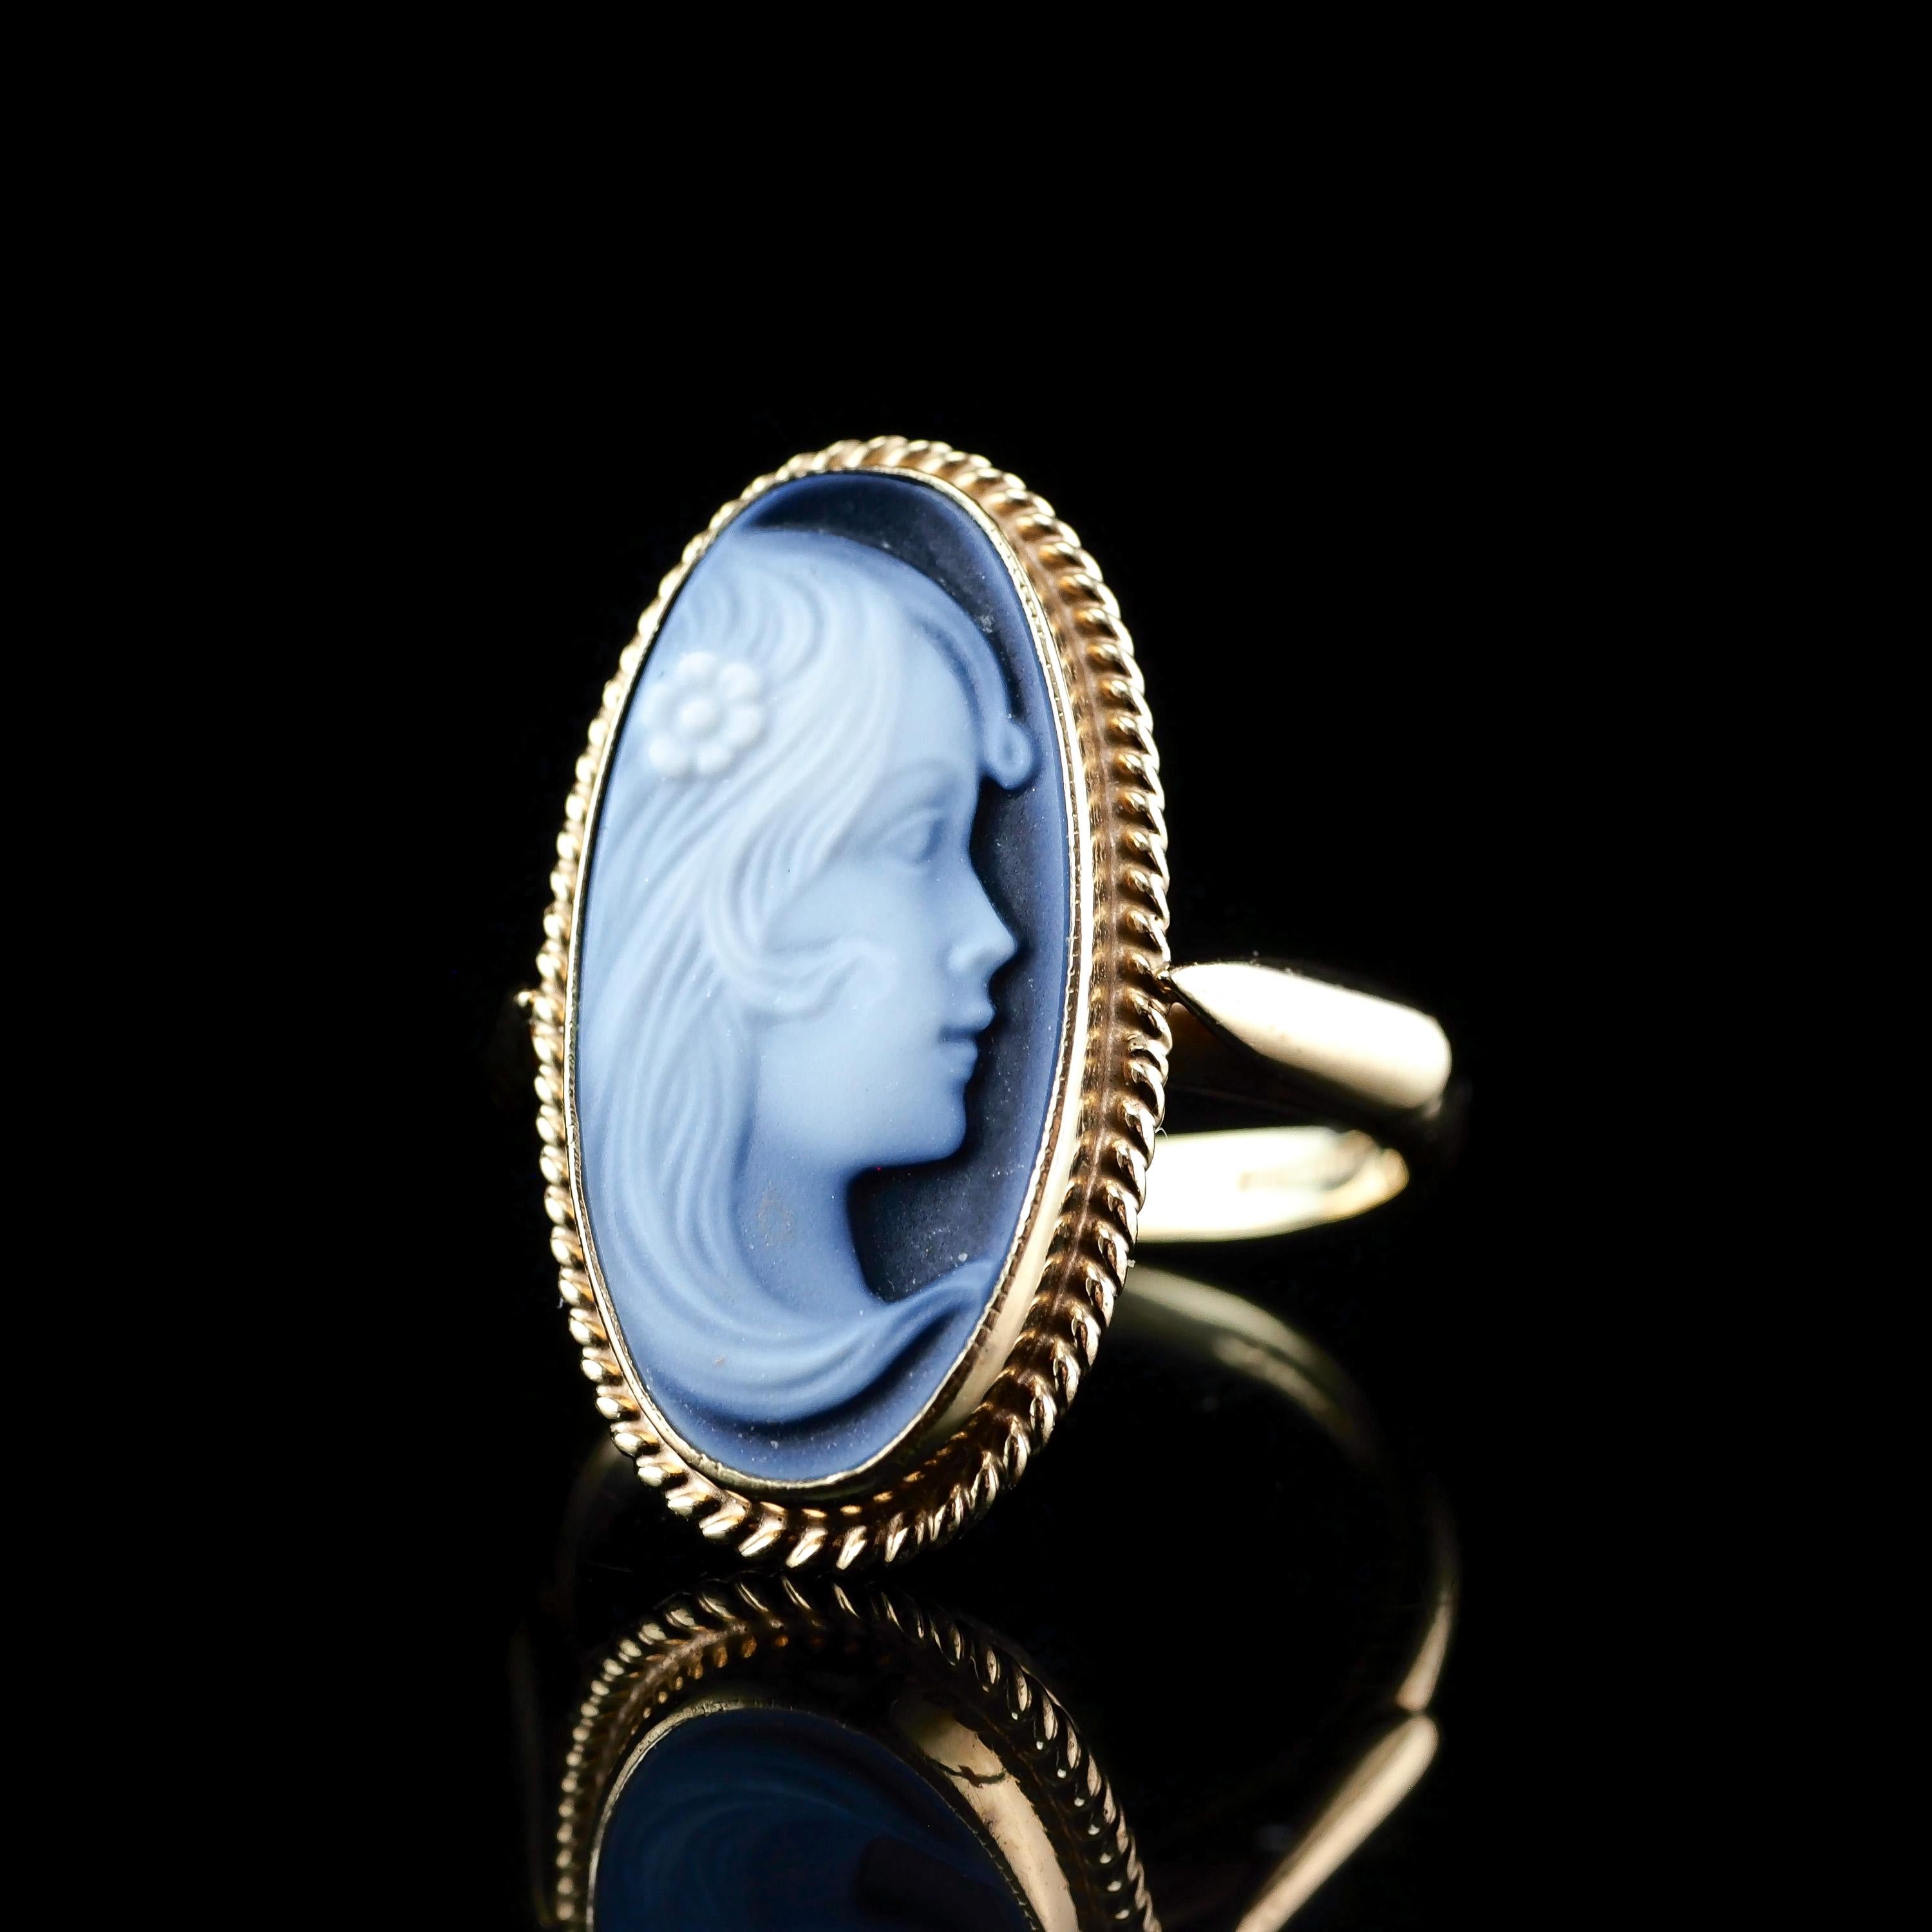 9 Carat Gold Agate Cameo Ring with Beautiful Figural Maiden Head 1